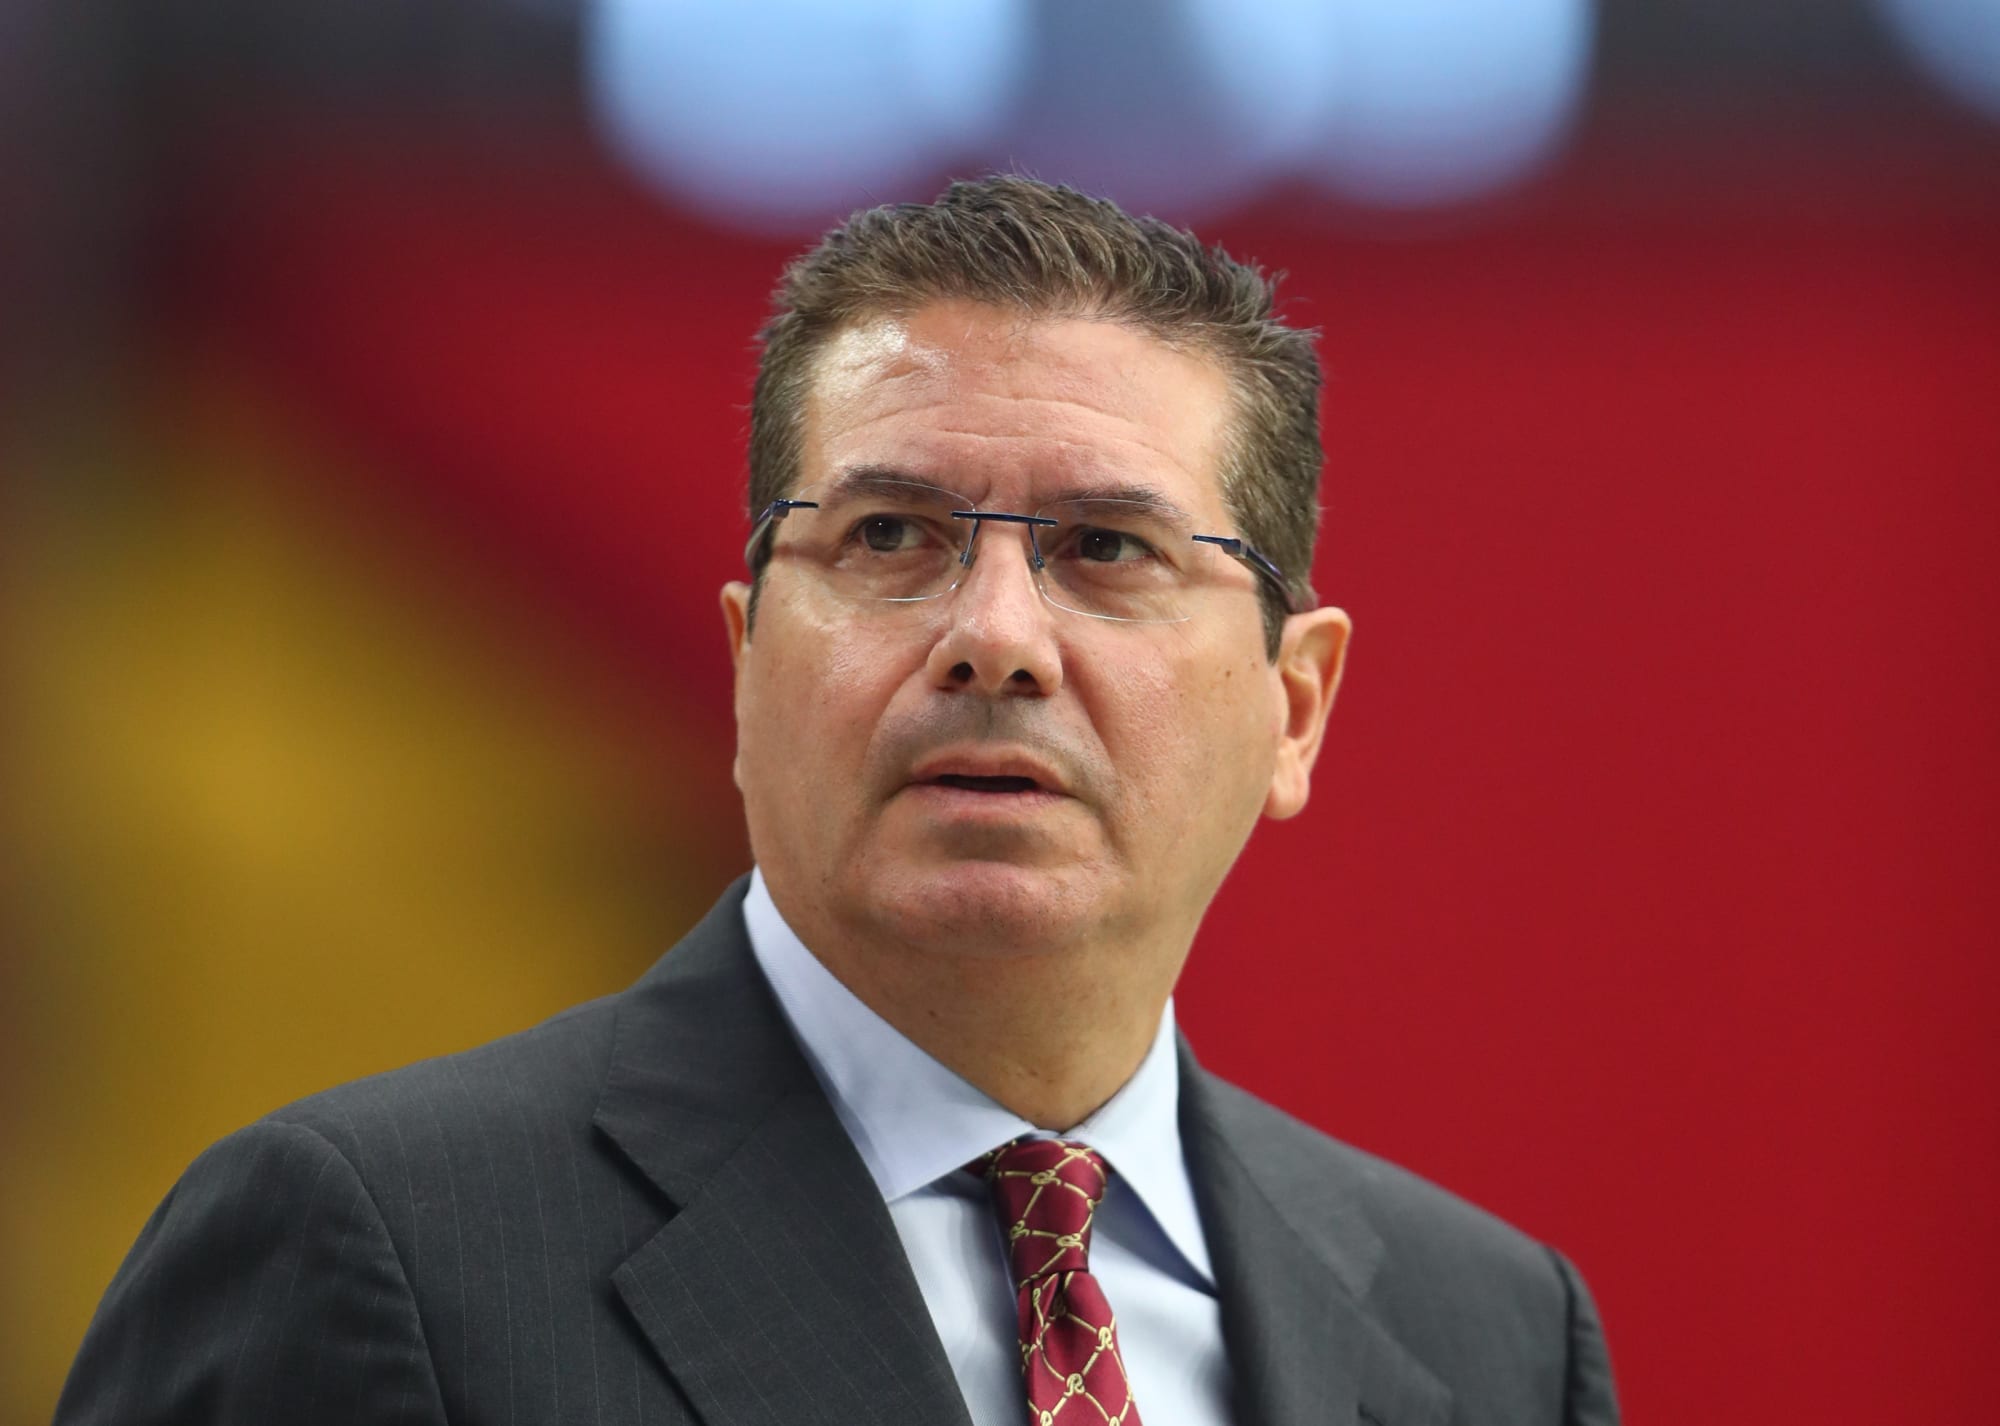 Dan Snyder reportedly in trouble as NFL owners try to vote him out